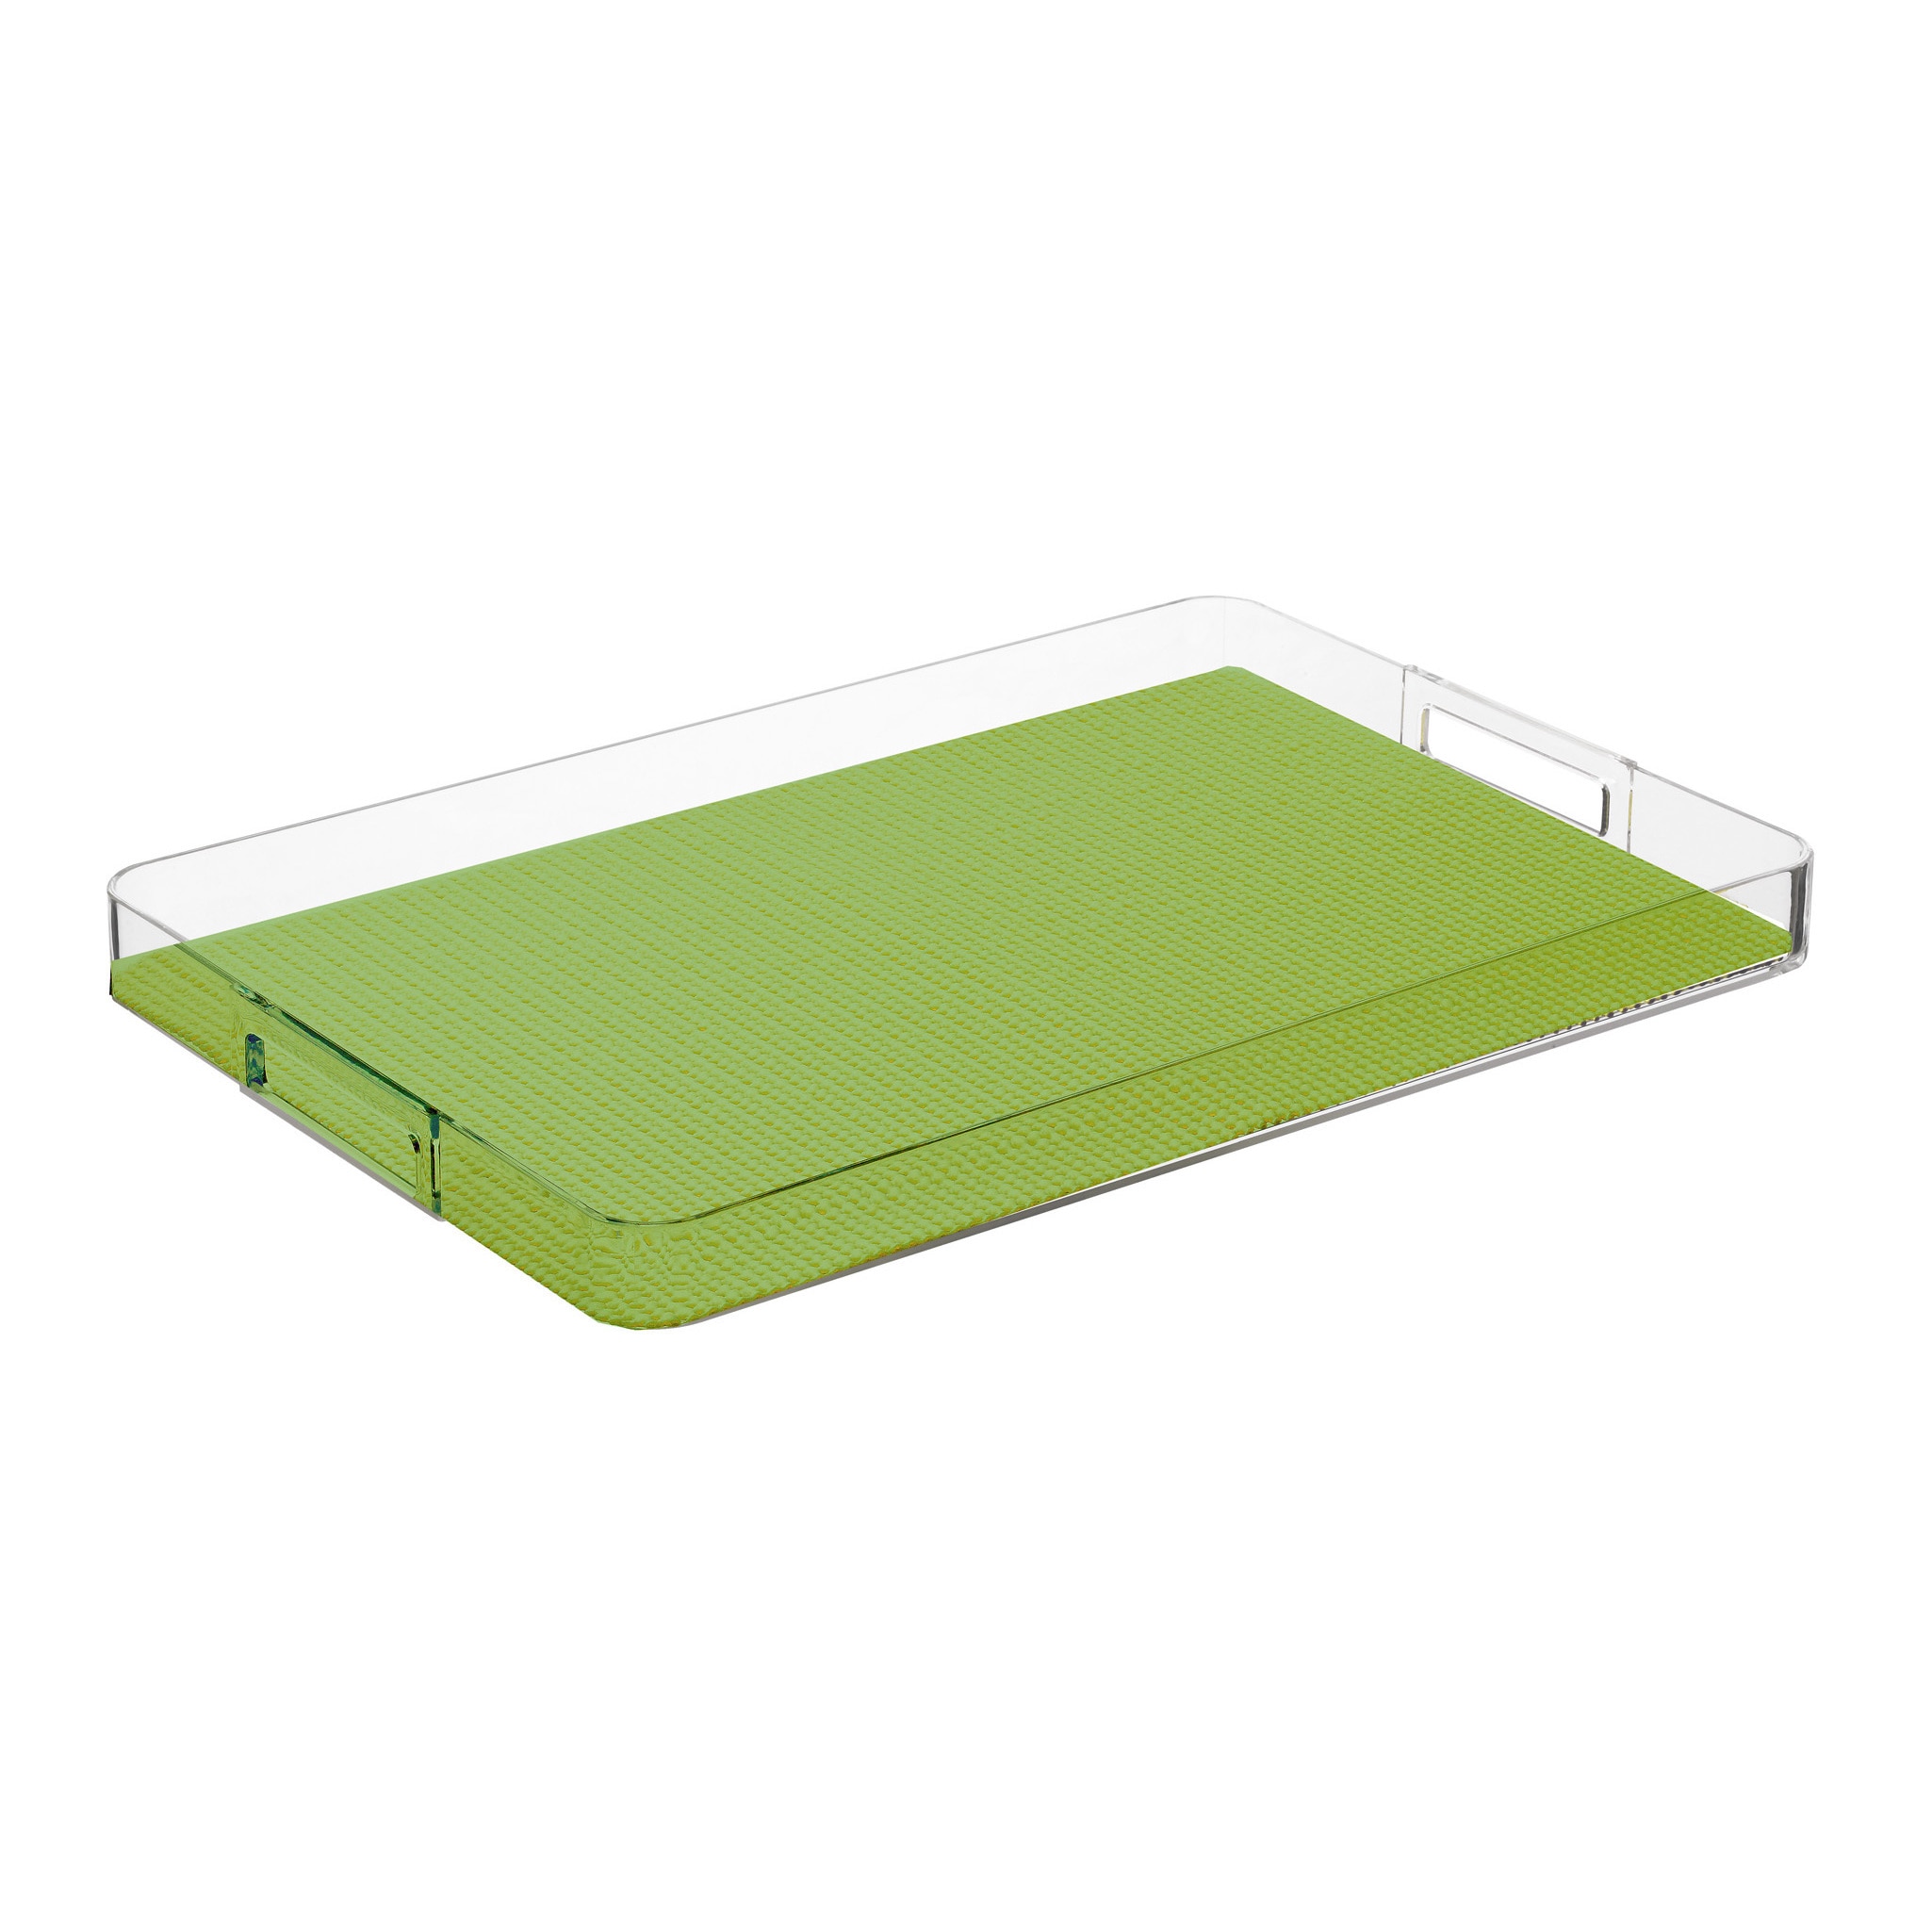 Fishnet Rectangular Lucite Serving Tray - On Sale - Bed Bath